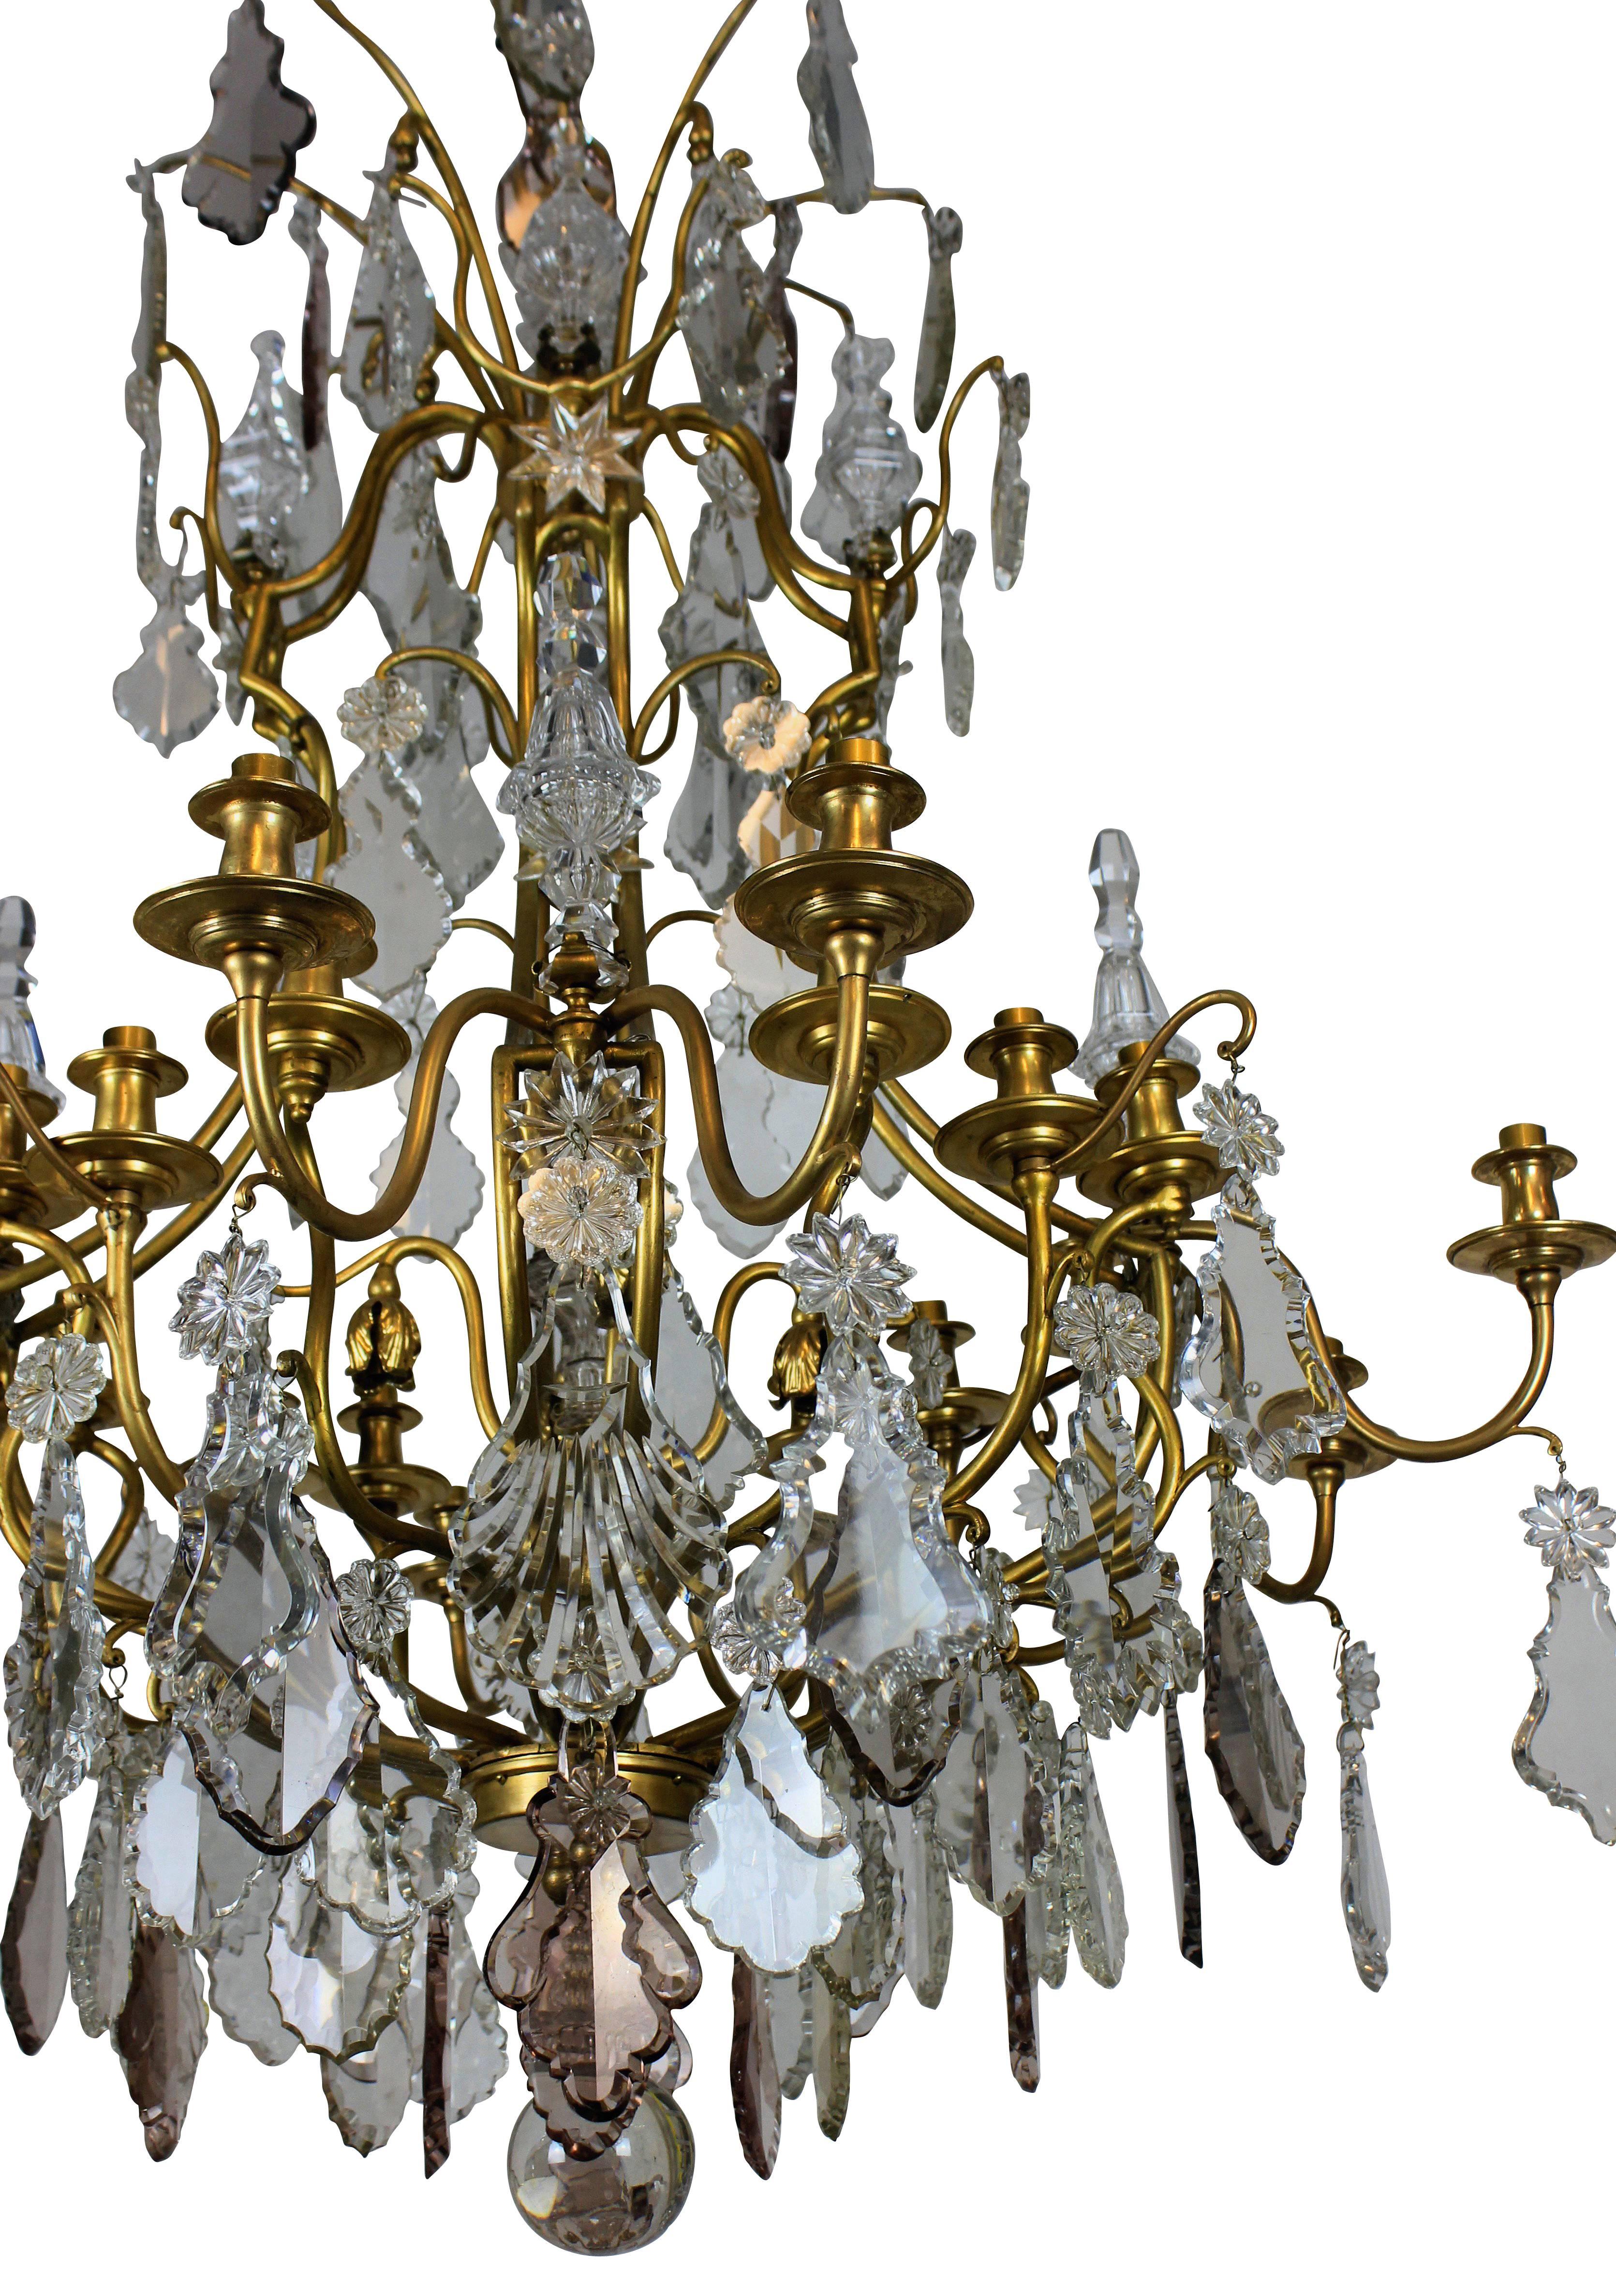 A large ormolu and cut glass cage chandelier by Baccarat of Paris, en suite with a pair of large wall sconces.

  